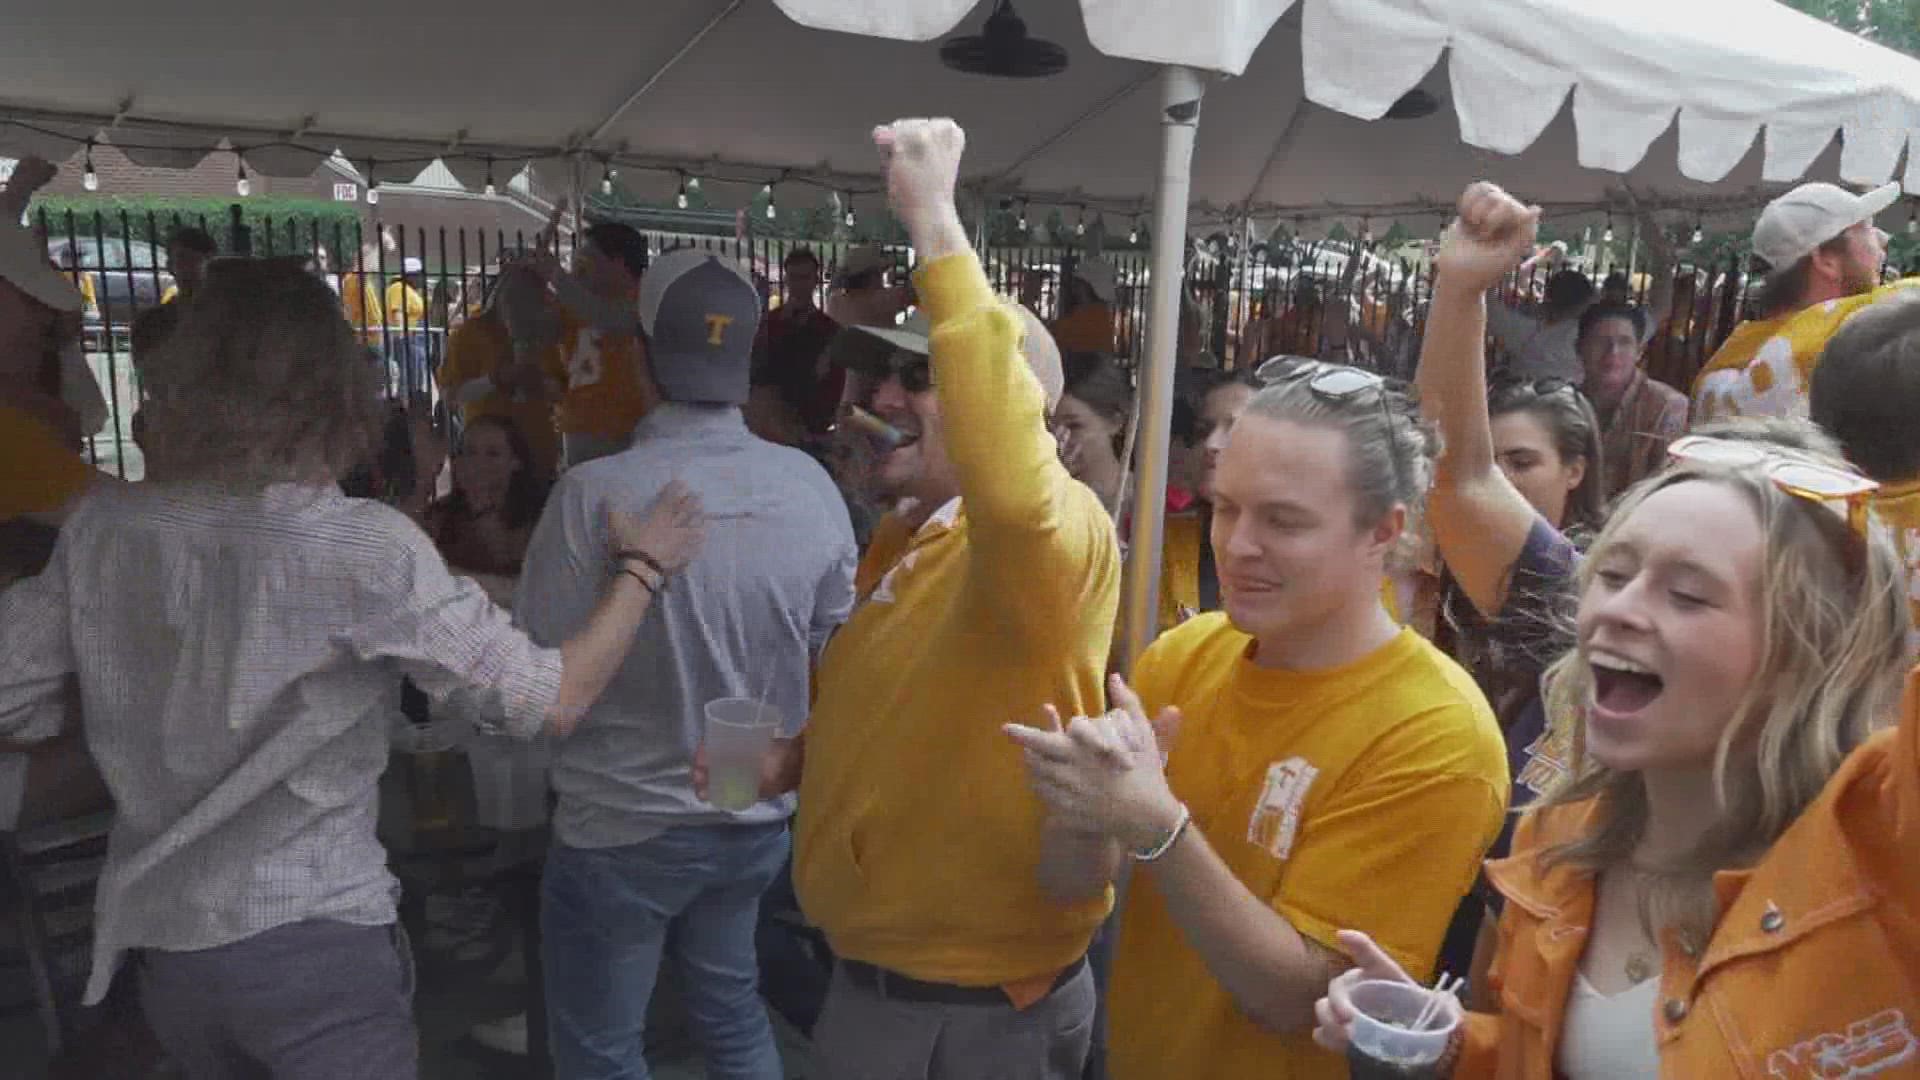 Tennessee's playoff hopes are likely over but fans say they are proud of how far they have come.